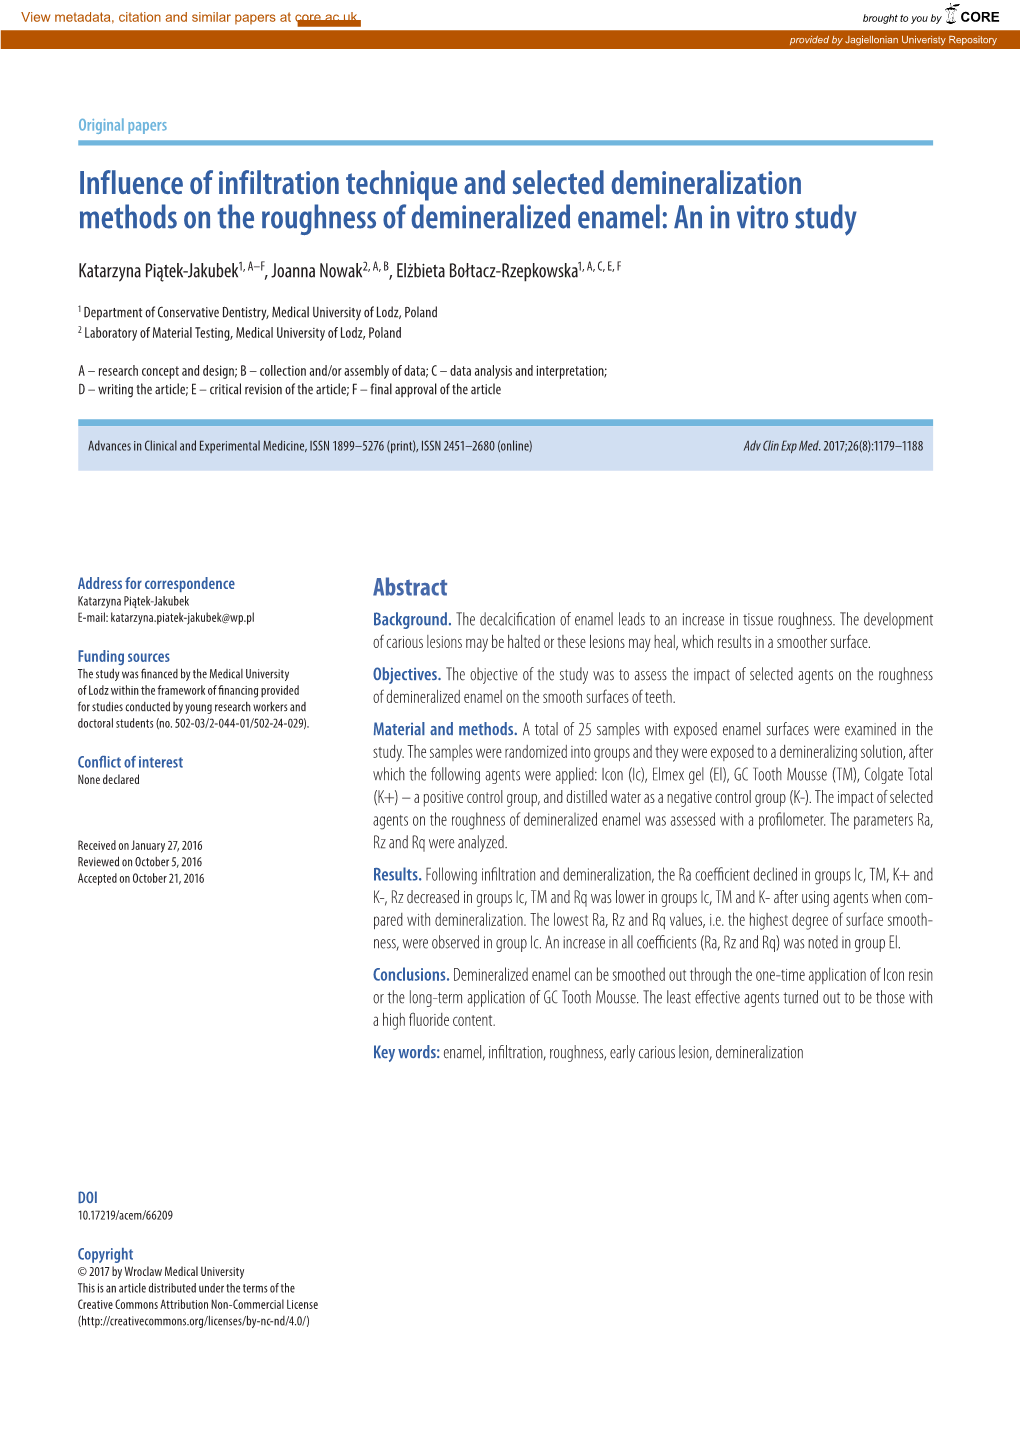 Influence of Infiltration Technique and Selected Demineralization Methods on the Roughness of Demineralized Enamel: an in Vitro Study